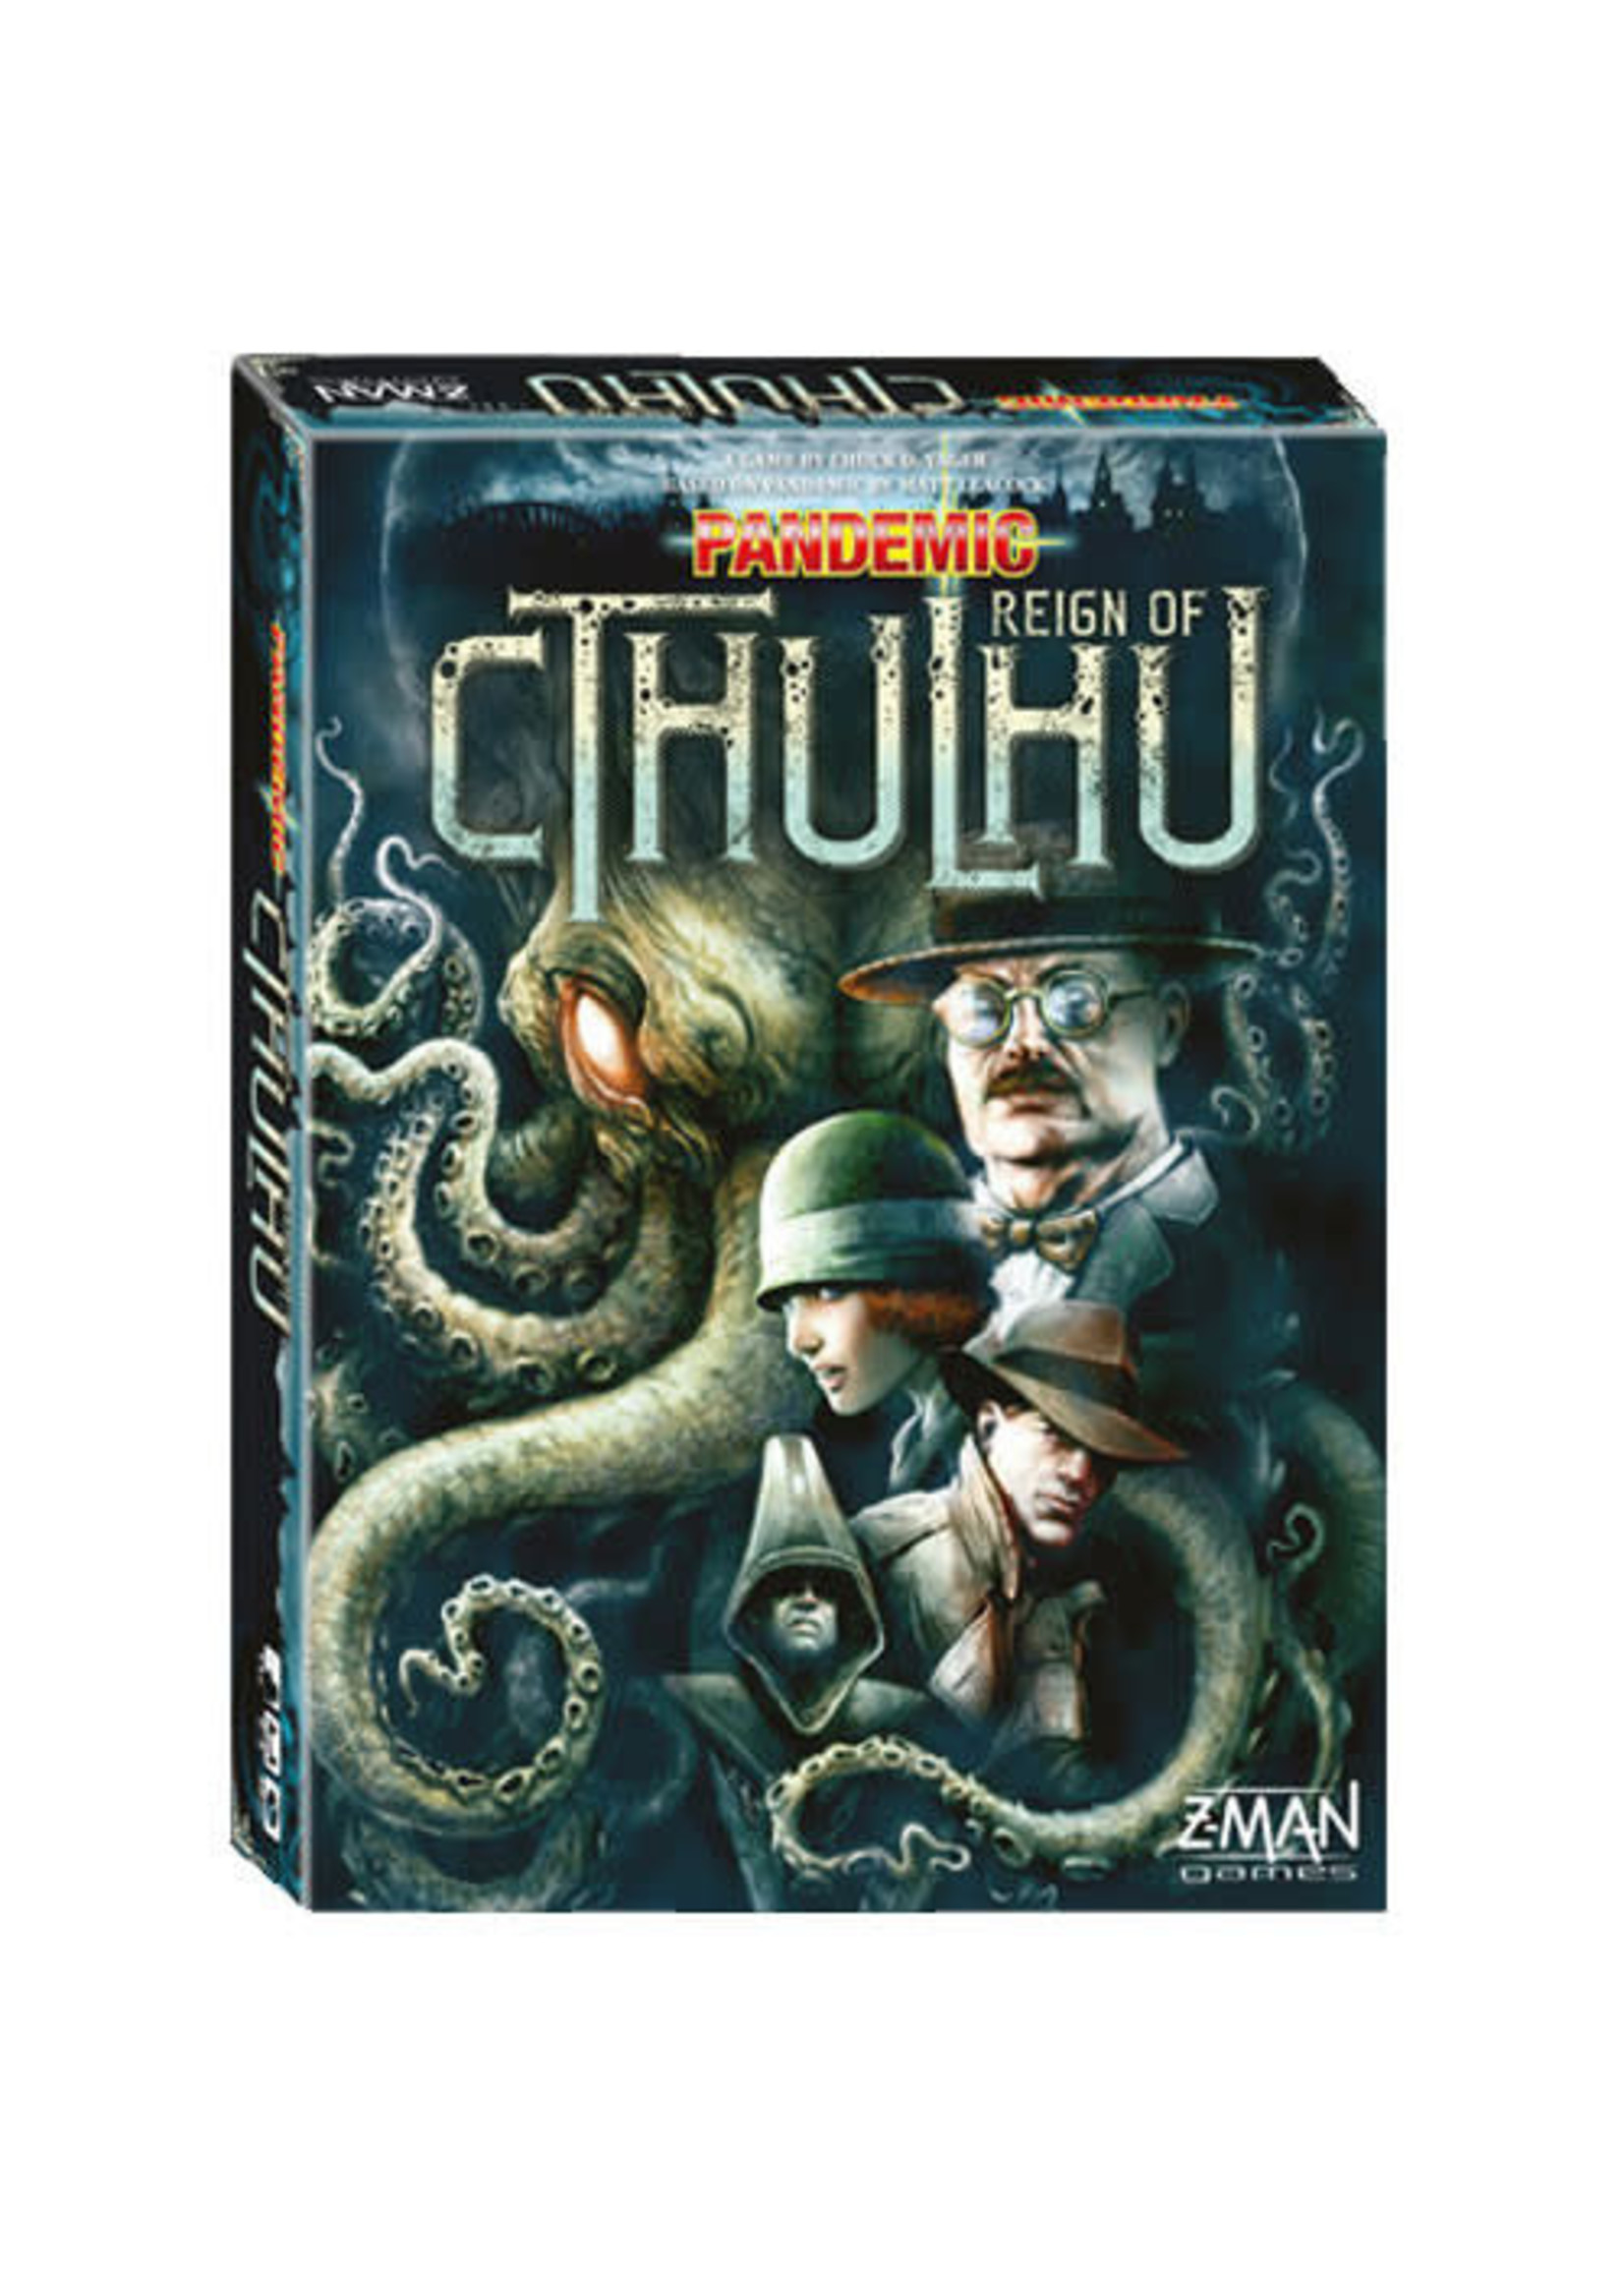 Z-Man Games Pandemic: Reign of Cthulu